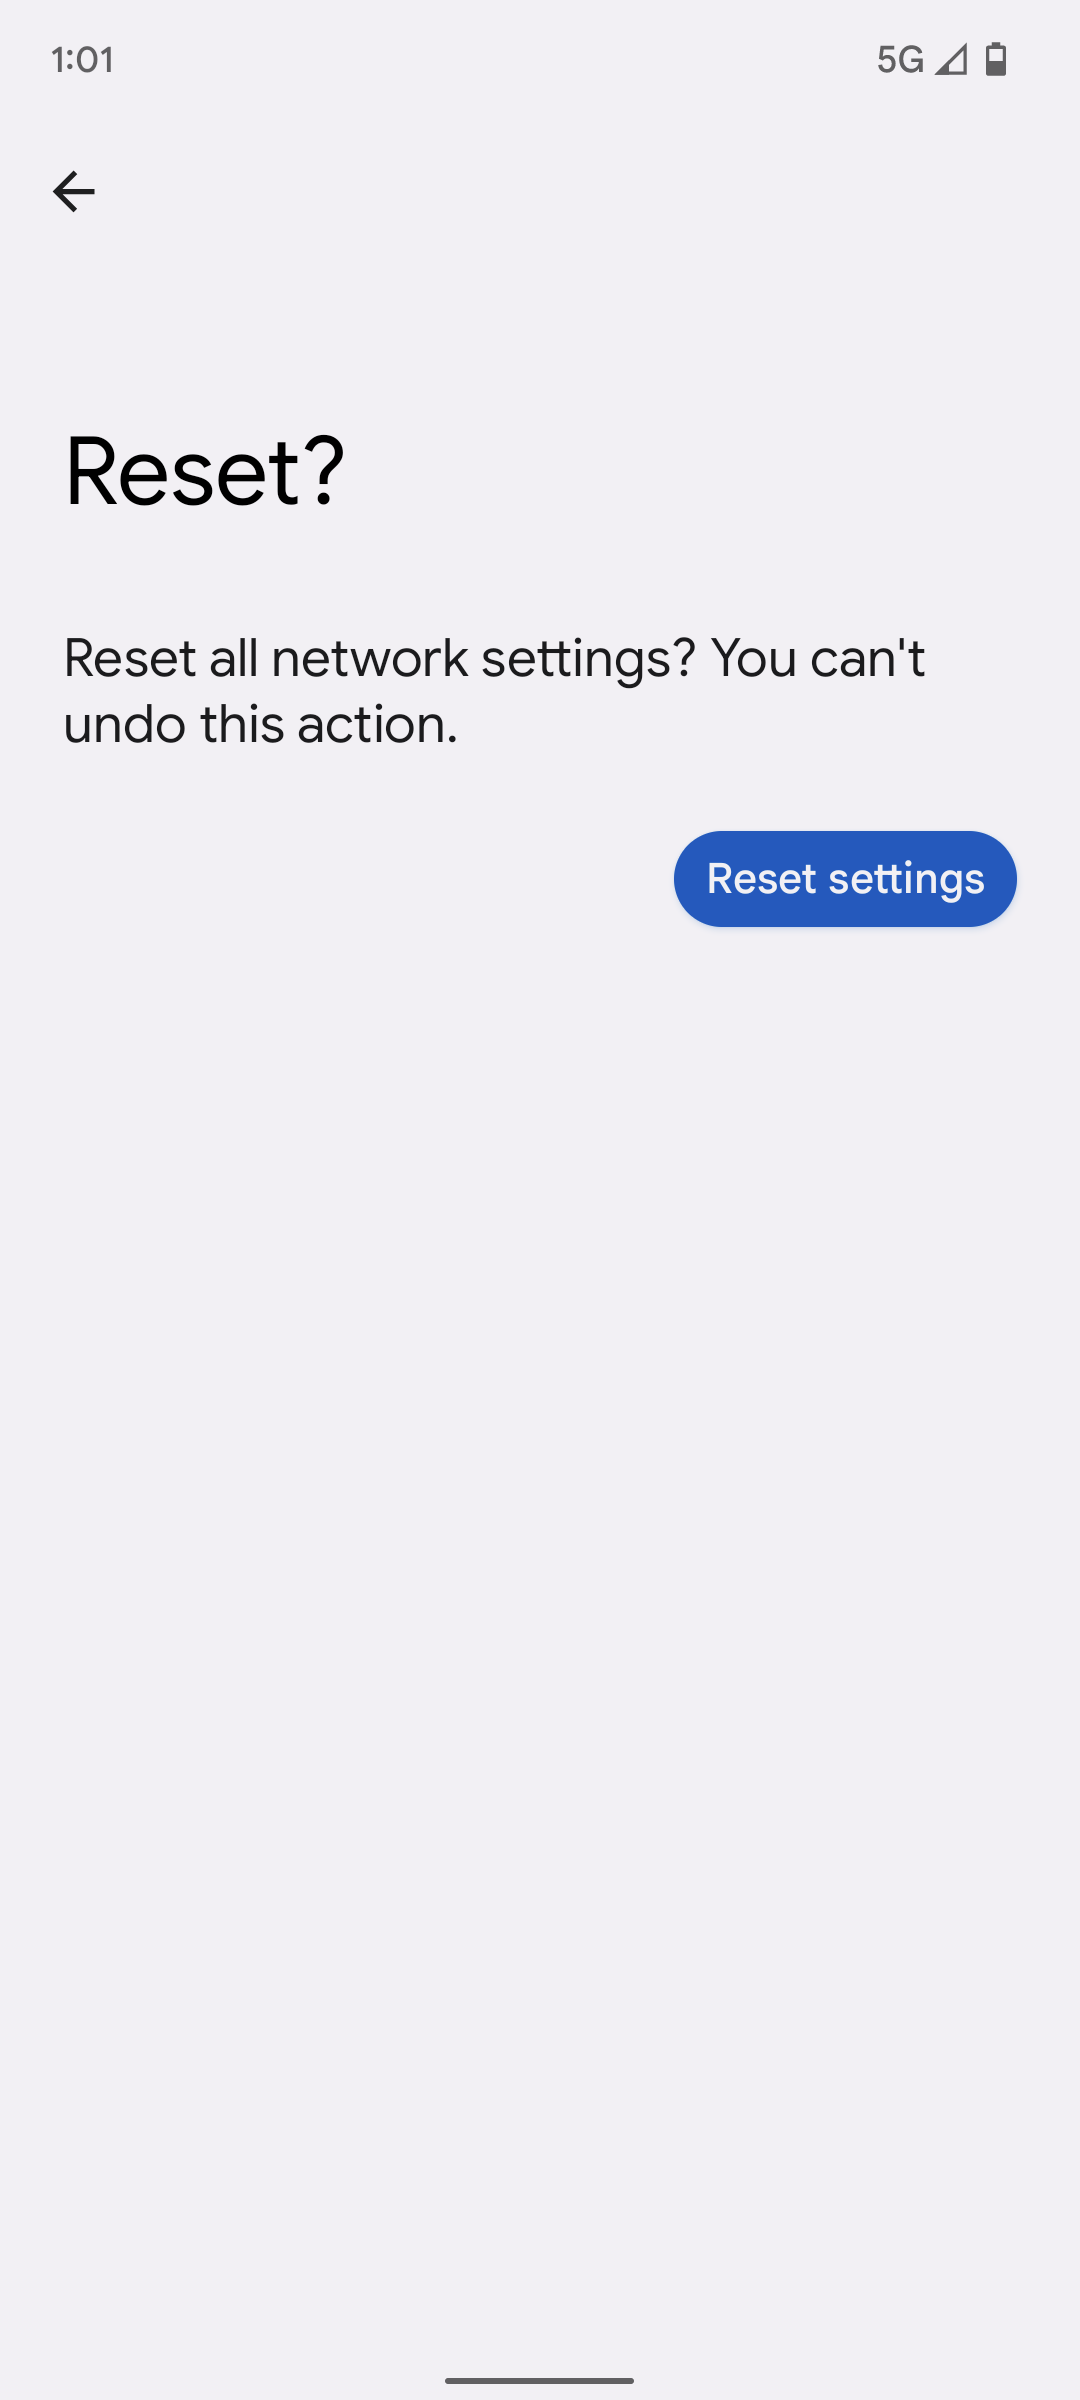 Touch Reset settings again.